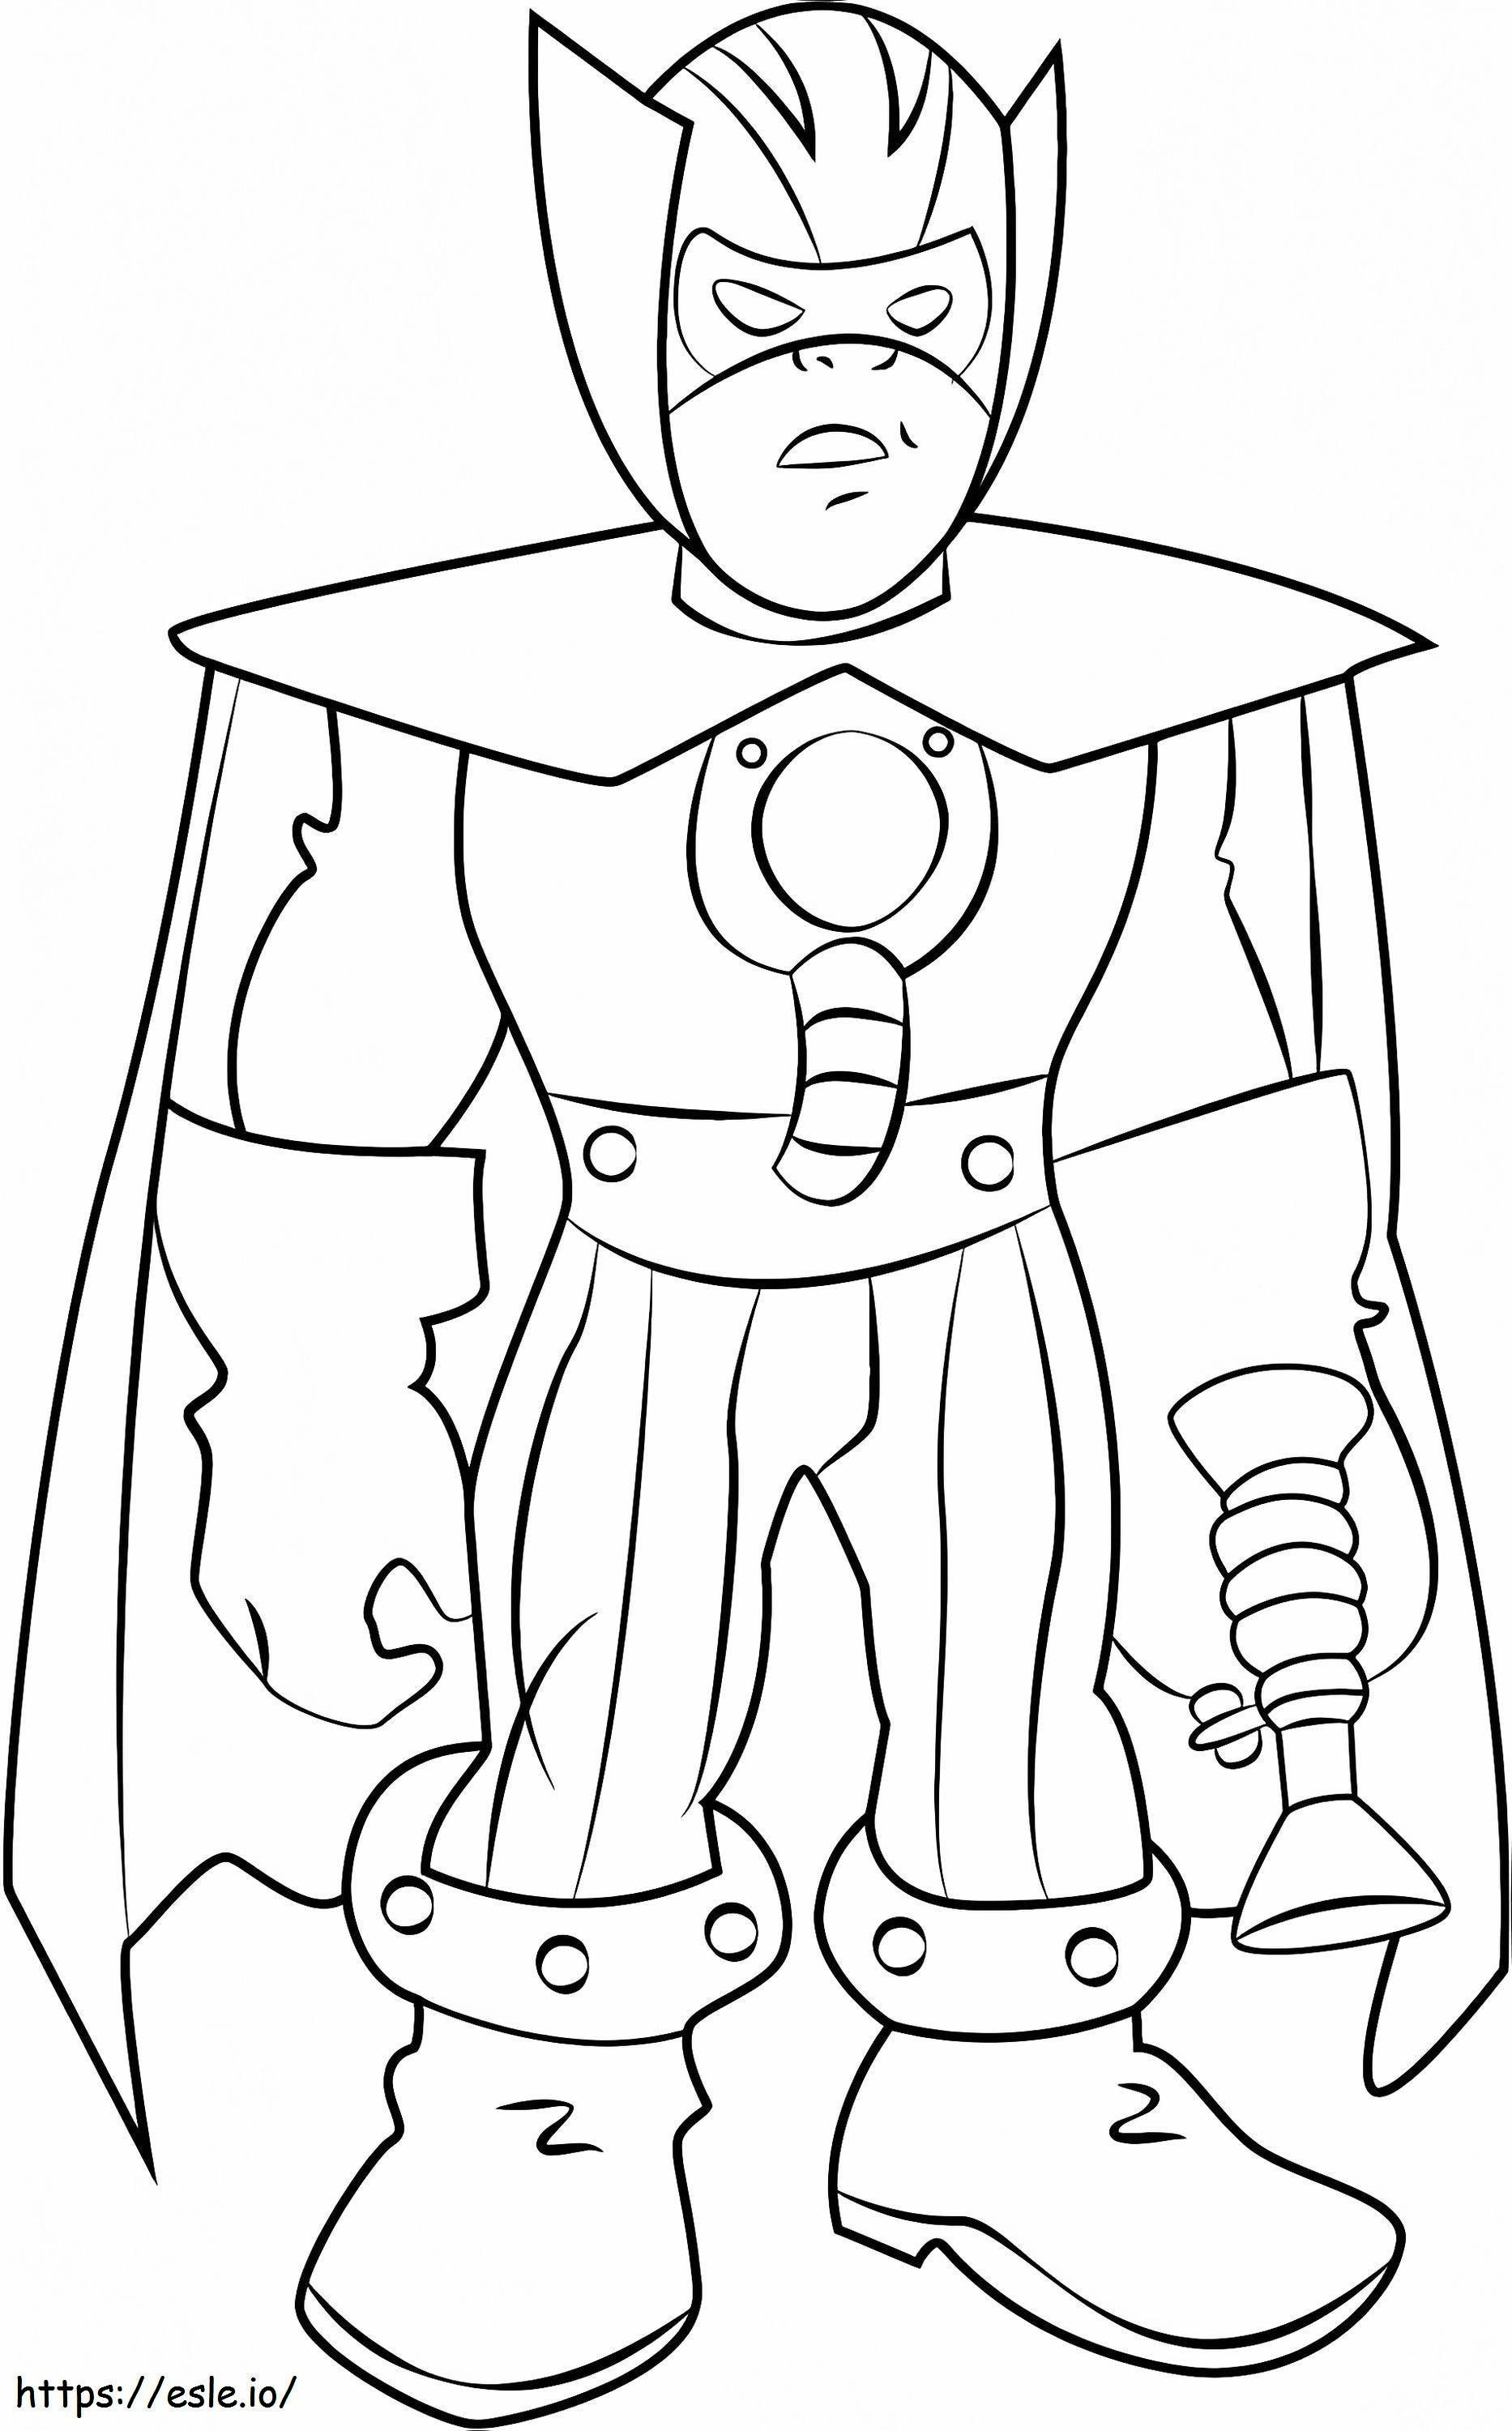 1532056194 Melter A4 coloring page